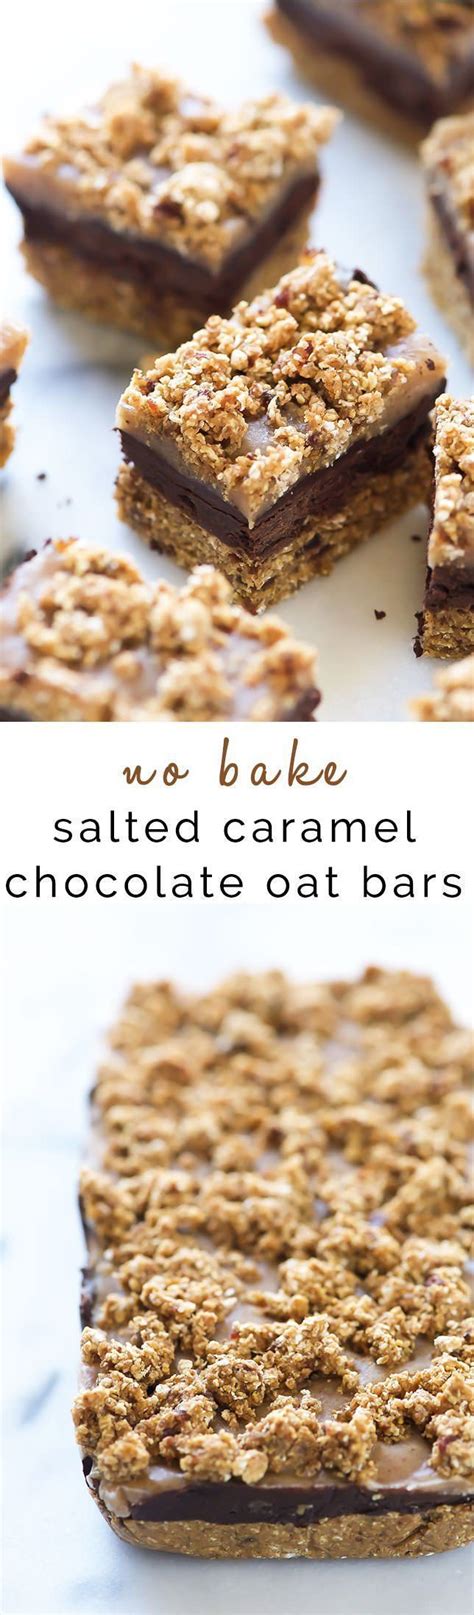 Pour the chocolate mixture over the crust in the pan, reserving. No Bake Salted Caramel Chocolate Oat Bars | Recipe in 2020 ...